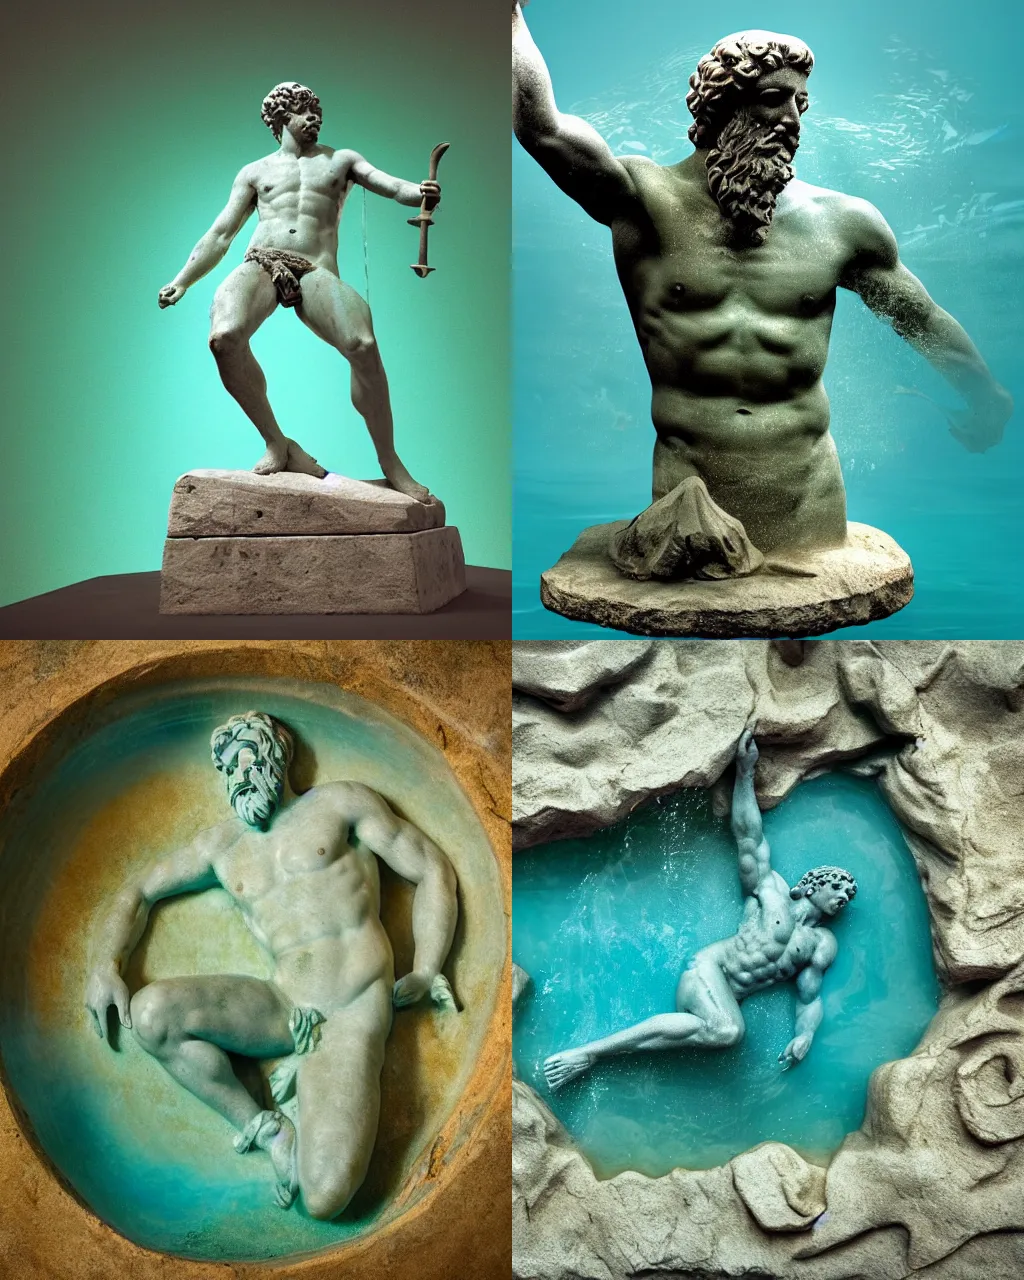 Prompt: ancient greek sculpture of the god poseidon submerged in the ocean, school of fish, photorealistic, blue and green water, volumetric lighting from above